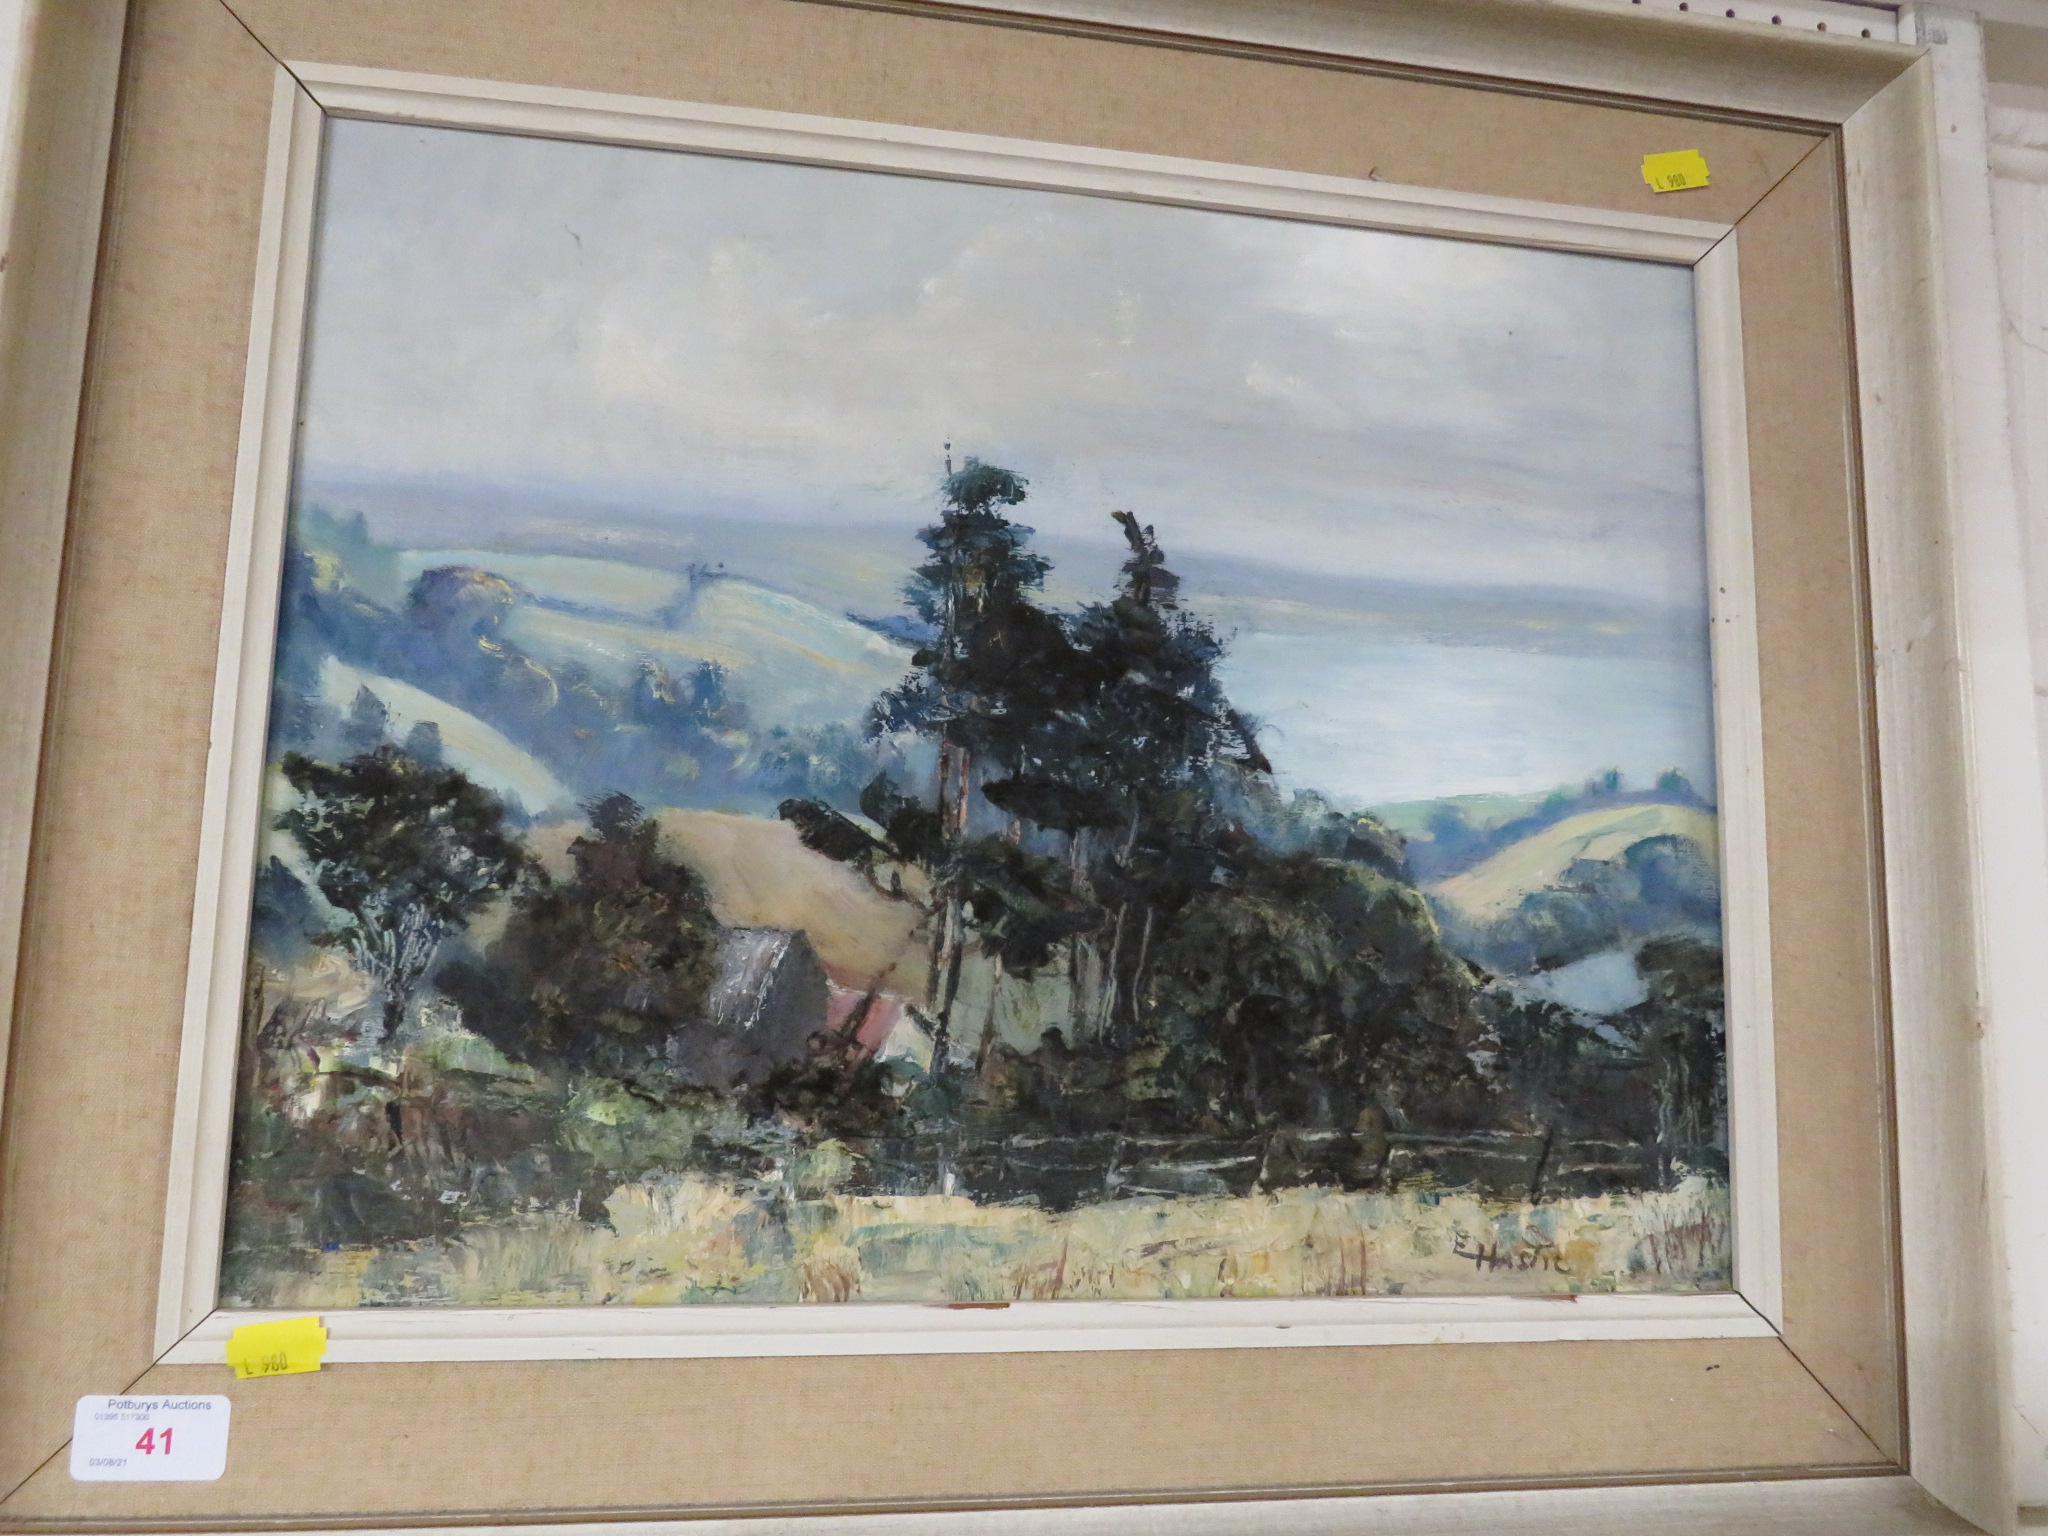 FRAMED OIL ON BOARD OF TREES IN LANDSCAPE SIGNED E. HASTIE LOWER RIGHT.